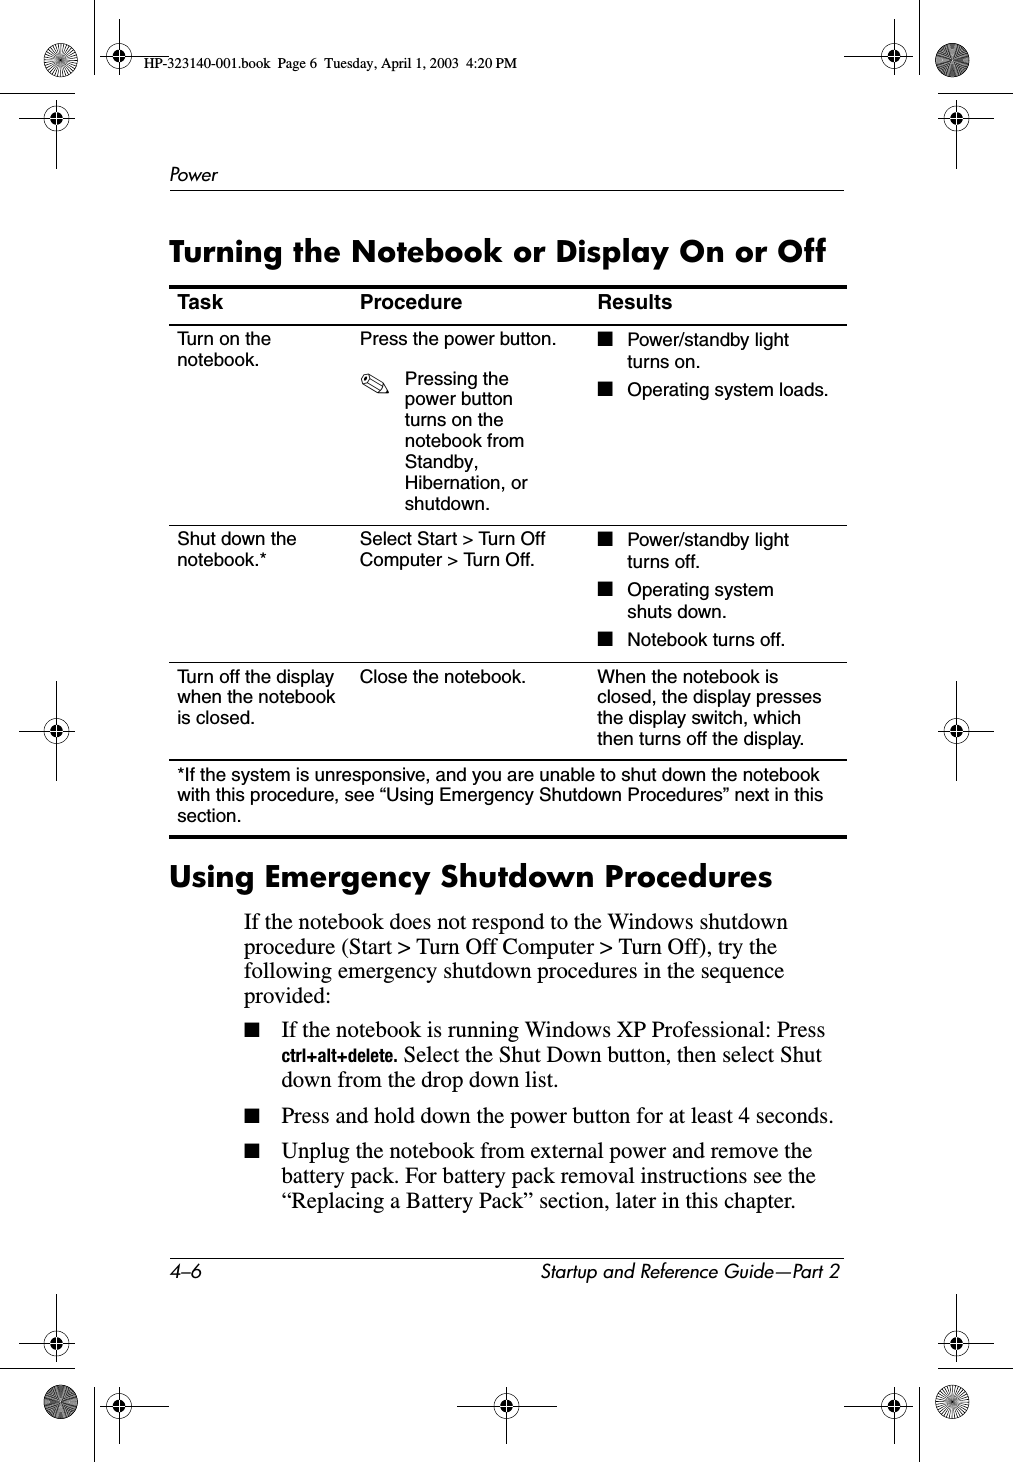 4–6 Startup and Reference Guide—Part 2PowerTurning the Notebook or Display On or OffUsing Emergency Shutdown ProceduresIf the notebook does not respond to the Windows shutdown procedure (Start &gt; Turn Off Computer &gt; Turn Off), try the following emergency shutdown procedures in the sequence provided:■If the notebook is running Windows XP Professional: Press ctrl+alt+delete. Select the Shut Down button, then select Shut down from the drop down list.■Press and hold down the power button for at least 4 seconds.■Unplug the notebook from external power and remove the battery pack. For battery pack removal instructions see the “Replacing a Battery Pack” section, later in this chapter.Task Procedure ResultsTurn on the notebook.Press the power button.✎Pressing the power button turns on the notebook from Standby,Hibernation, or shutdown.■Power/standby light turns on.■Operating system loads.Shut down the notebook.*Select Start &gt; Turn Off Computer &gt; Turn Off.■Power/standby light turns off.■Operating system shuts down.■Notebook turns off.Turn off the display when the notebook is closed.Close the notebook. When the notebook is closed, the display presses the display switch, which then turns off the display.*If the system is unresponsive, and you are unable to shut down the notebook with this procedure, see “Using Emergency Shutdown Procedures” next in this section.HP-323140-001.book  Page 6  Tuesday, April 1, 2003  4:20 PM